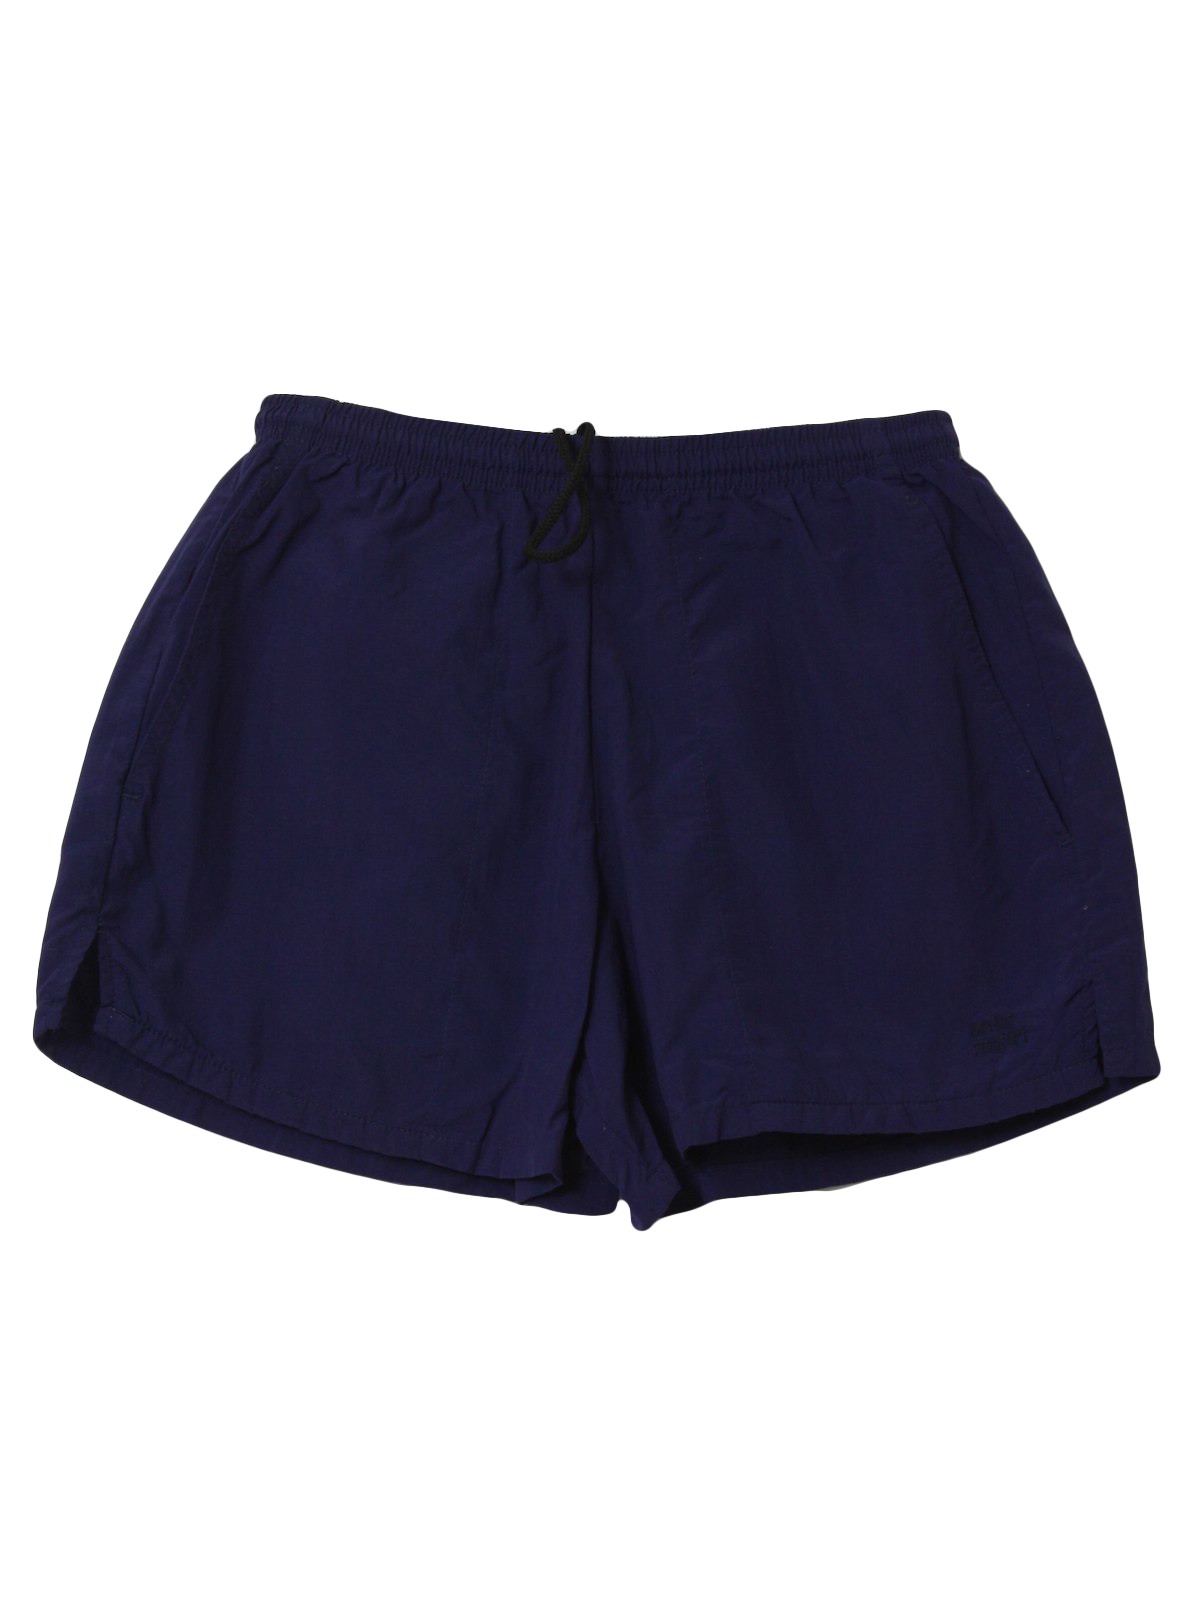 moving comfort women's shorts off 56 